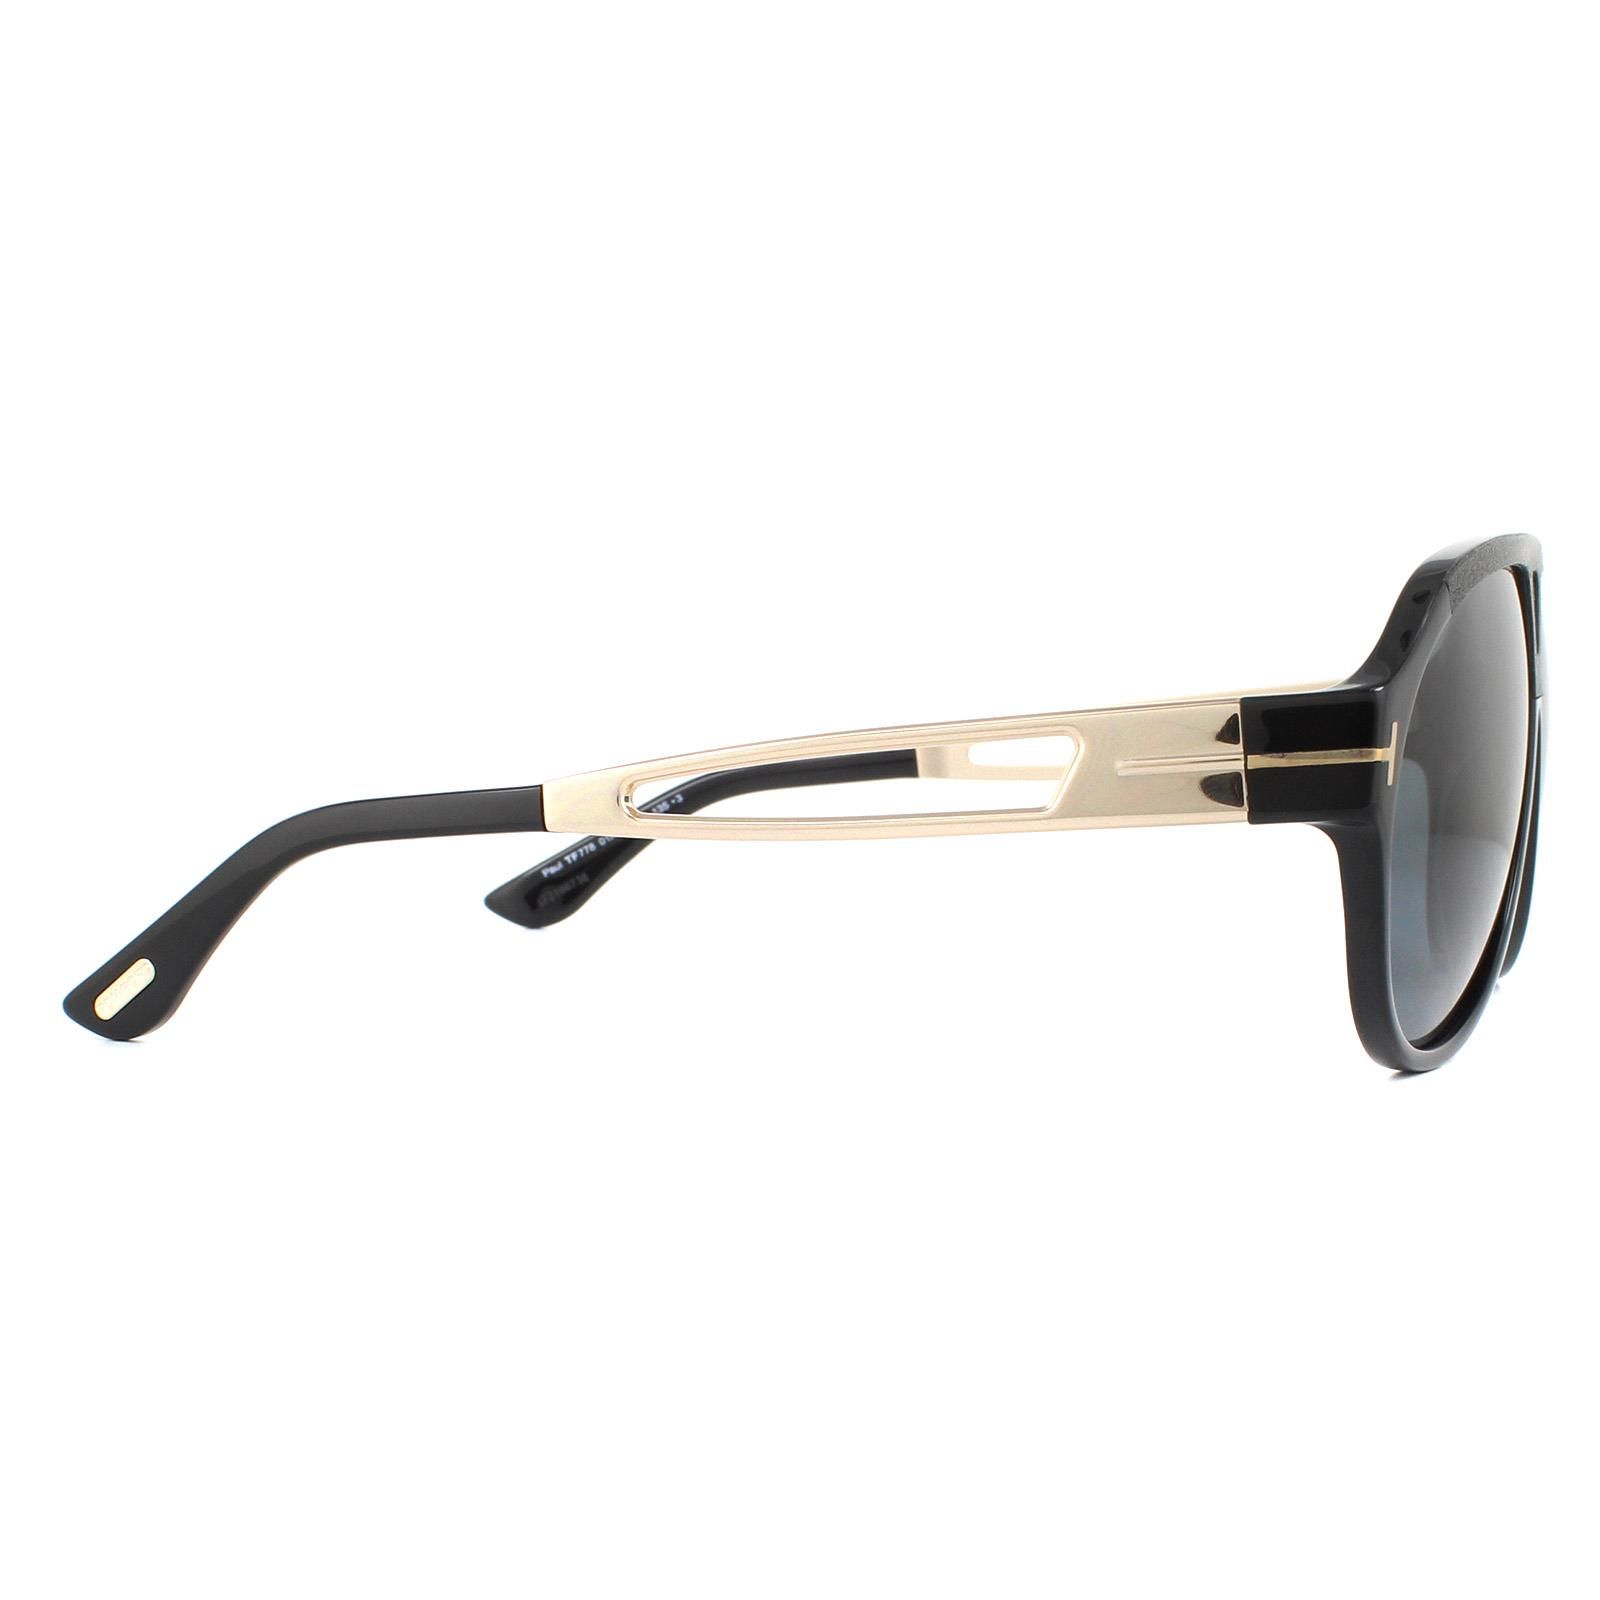 Tom Ford Sunglasses Paul FT0778 01A Shiny Black Smoke are a totally unique style with the cut-away detail from nthe temples, bold aviator shape and chunkcy thick retro style frame. Awesome Tom Ford sunglasses at his very best